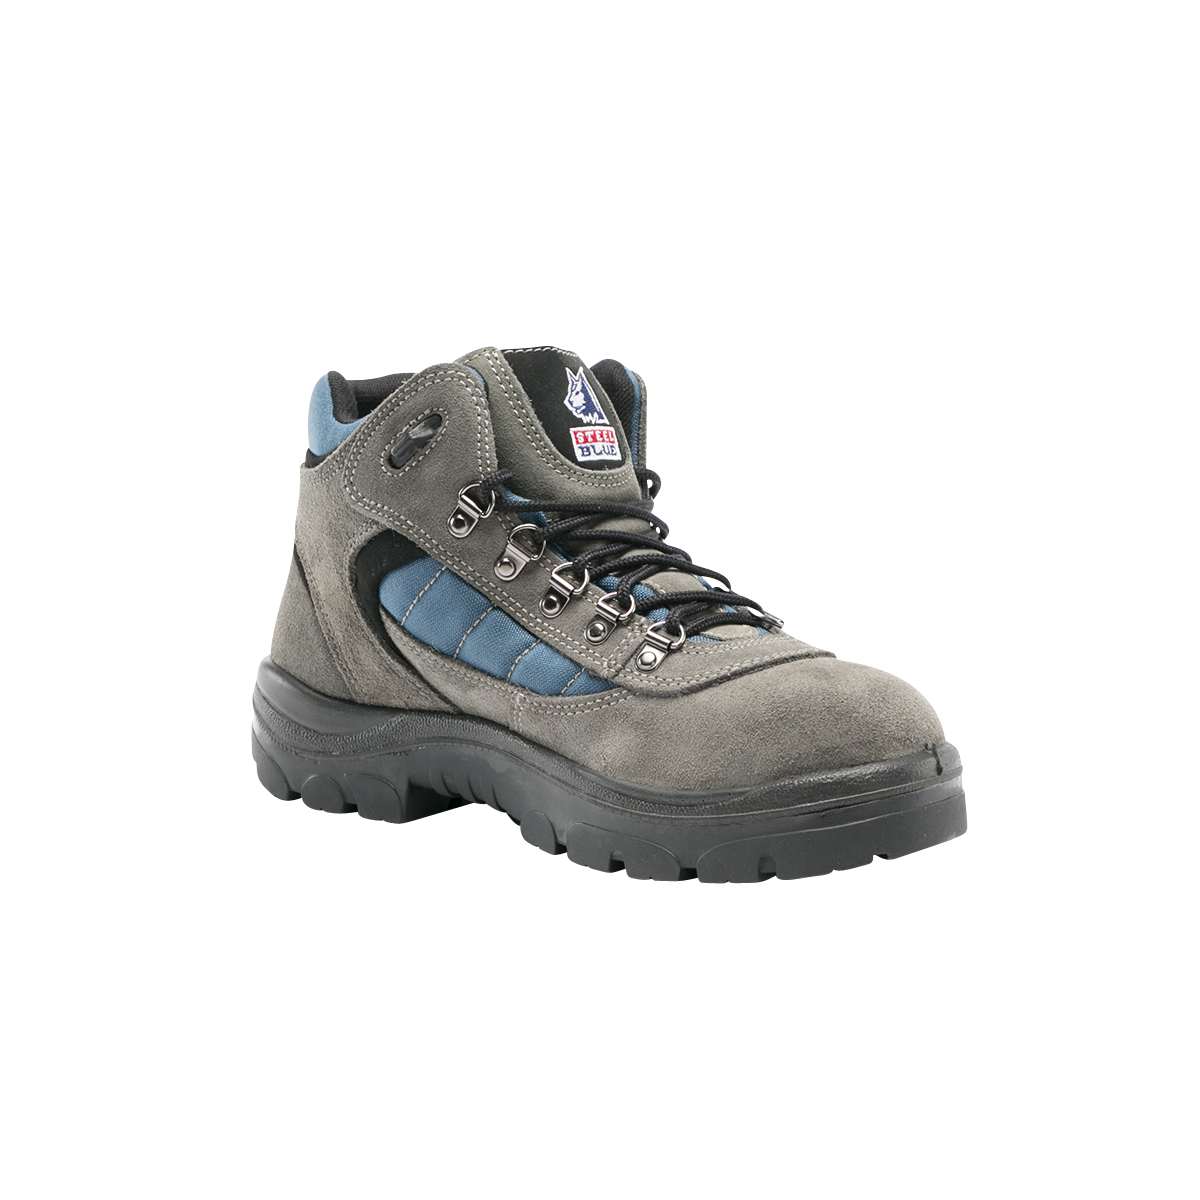 SAFETY BOOT WAGGA CHARCOAL S10 -ANKLE HIKER STYLE